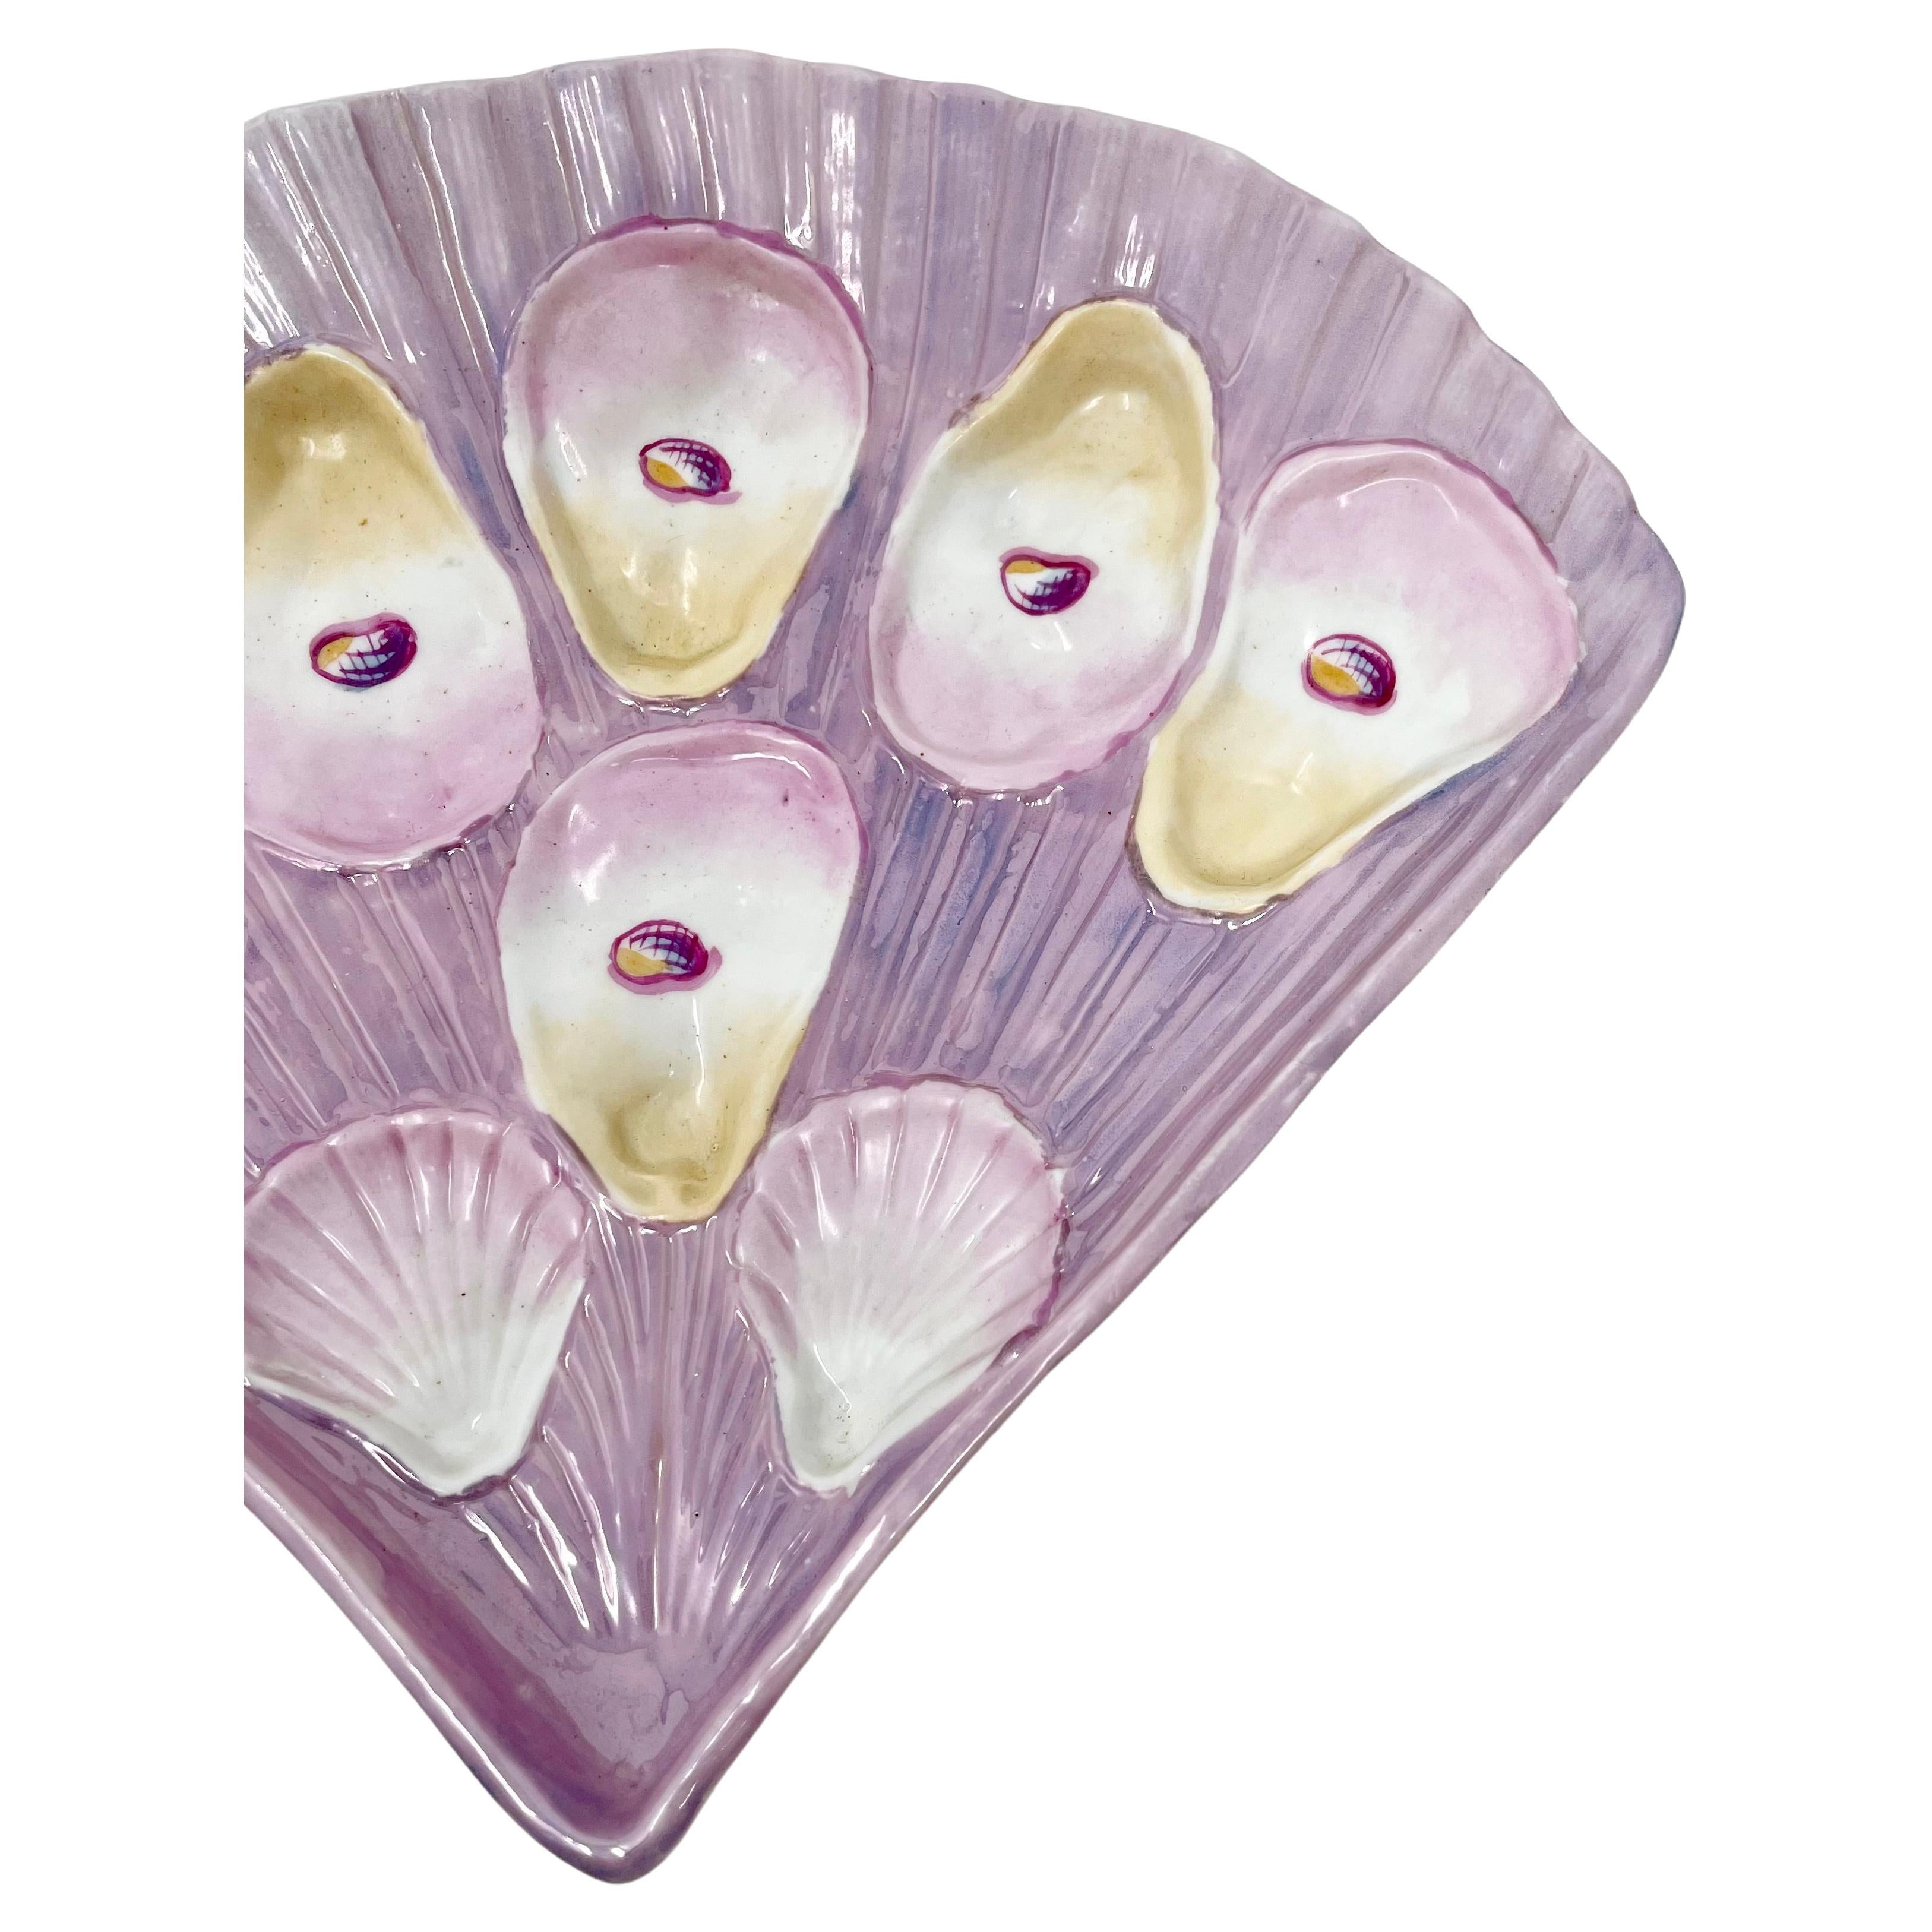 Rare antique German porcelain fan-shaped pink luster oyster plate, circa 1890.
This plate is stunning with a purplish pink pearlized glaze.